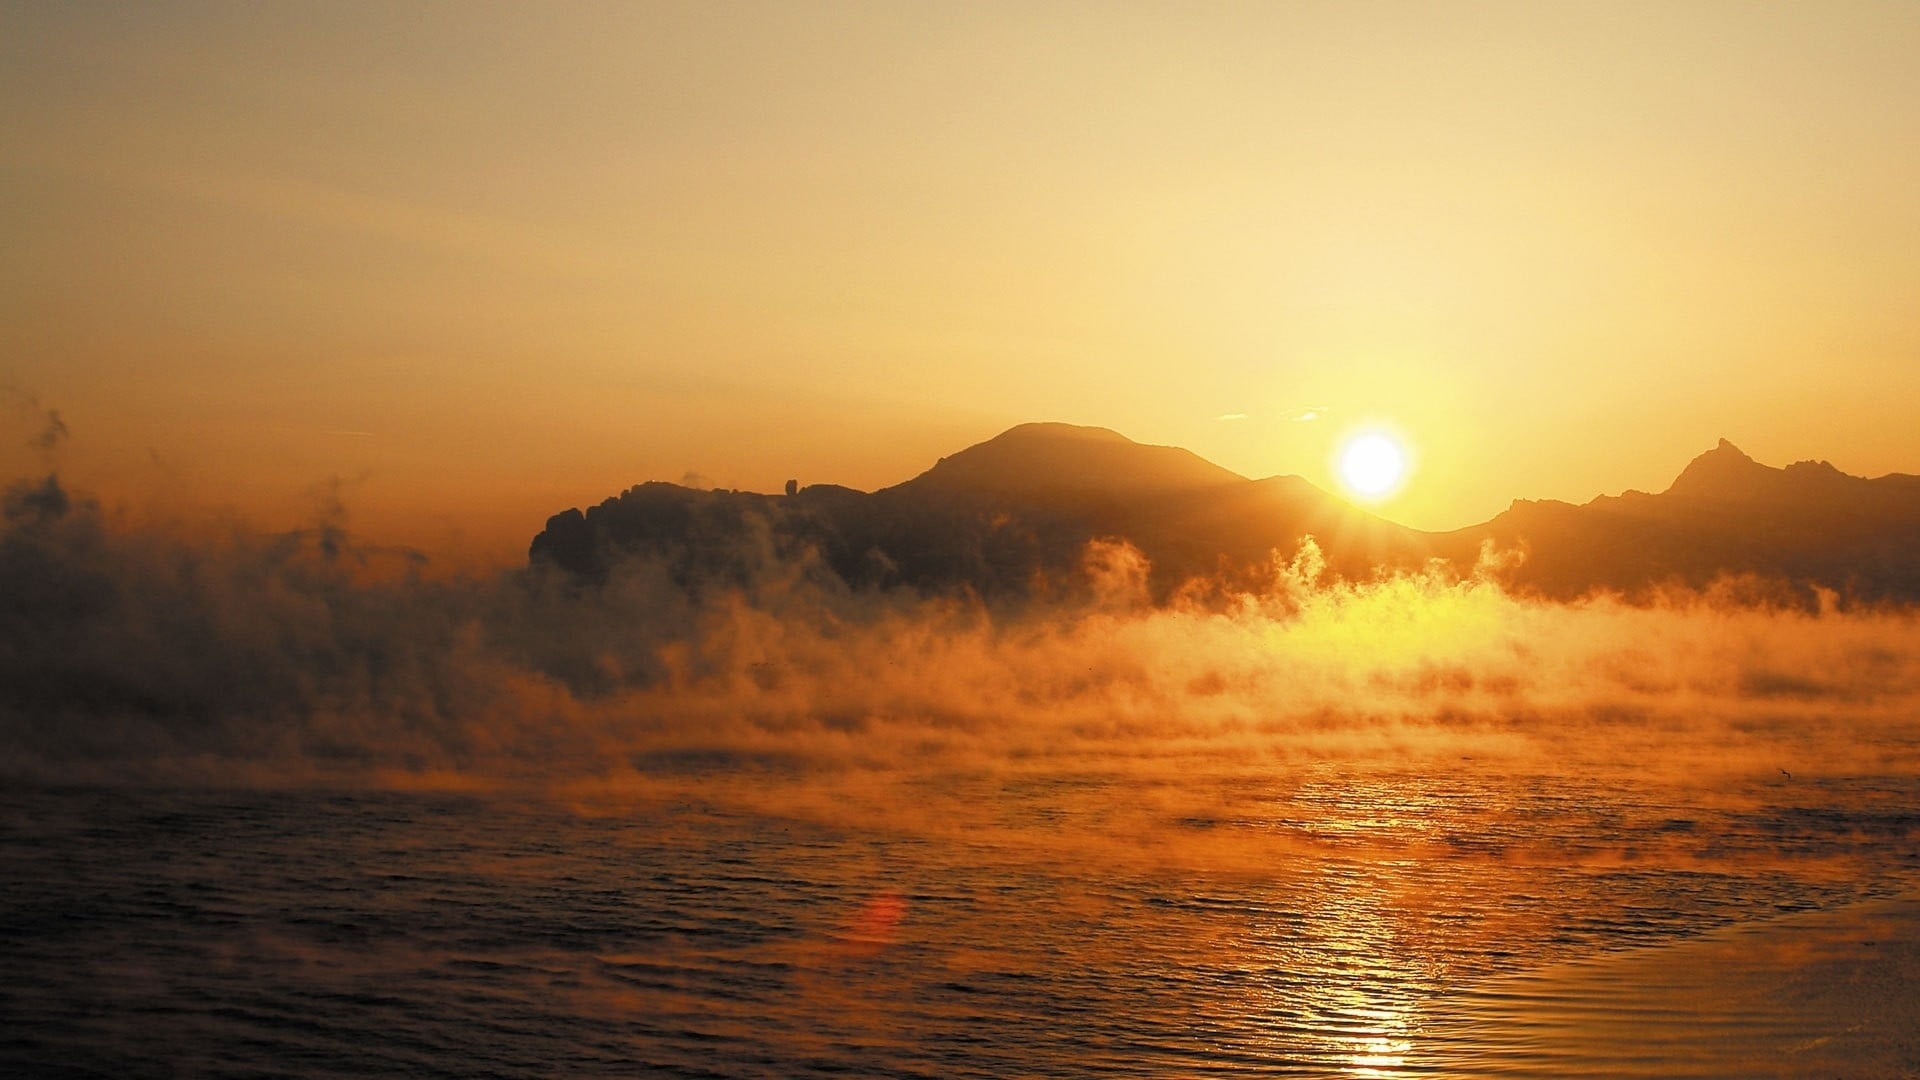 body of water with evaporating smokes during golden hour